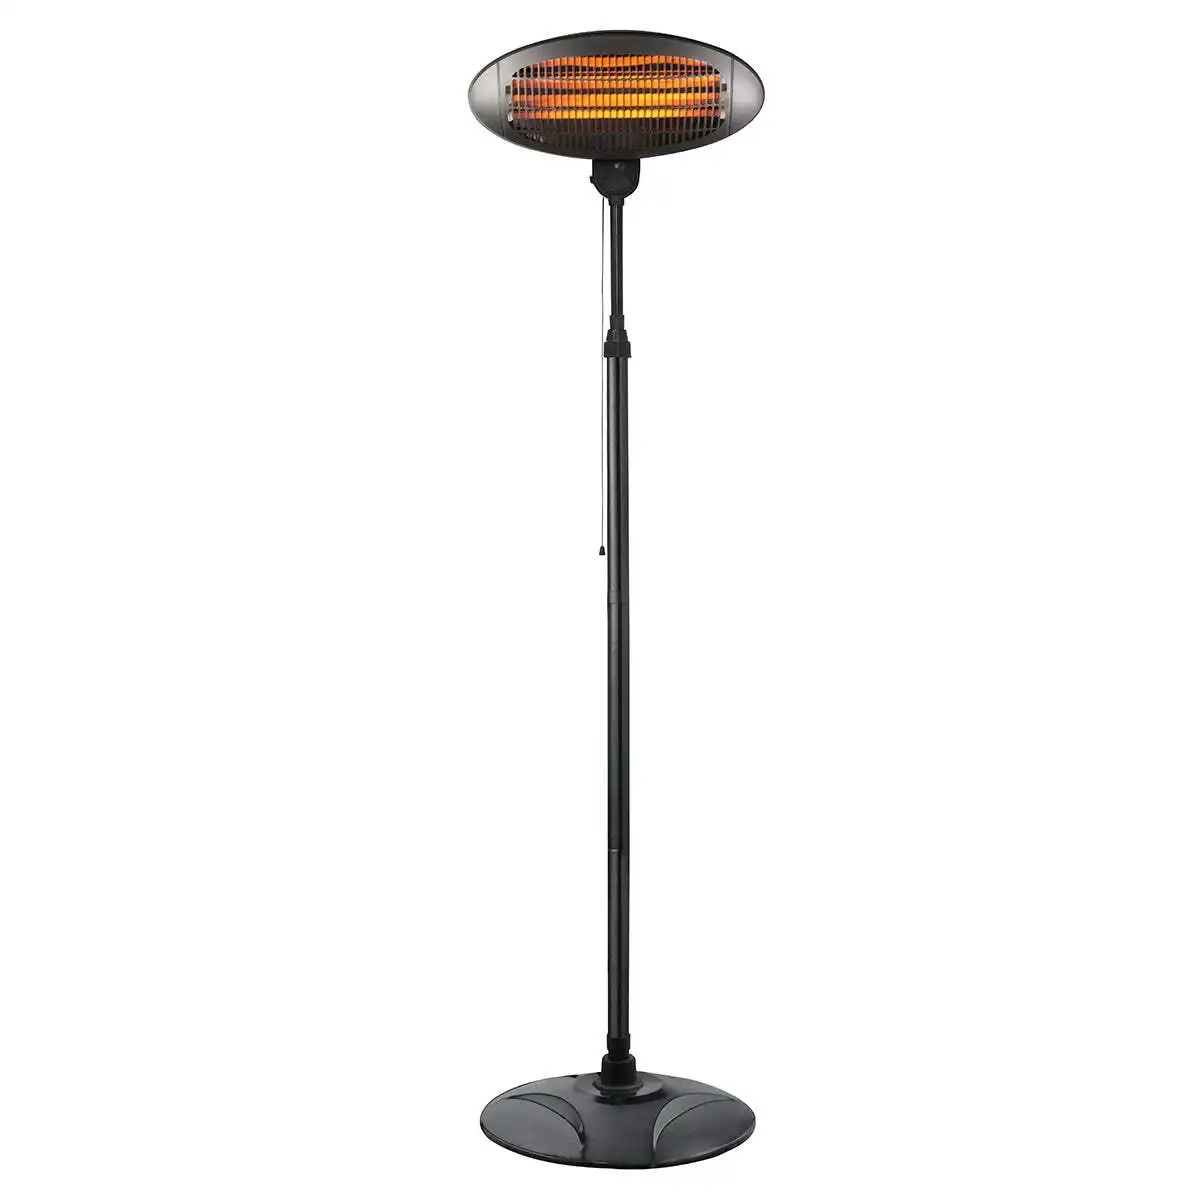 2000W 2.1m Free Standing Adjustable Portable Outdoor Electric Patio Heater Black